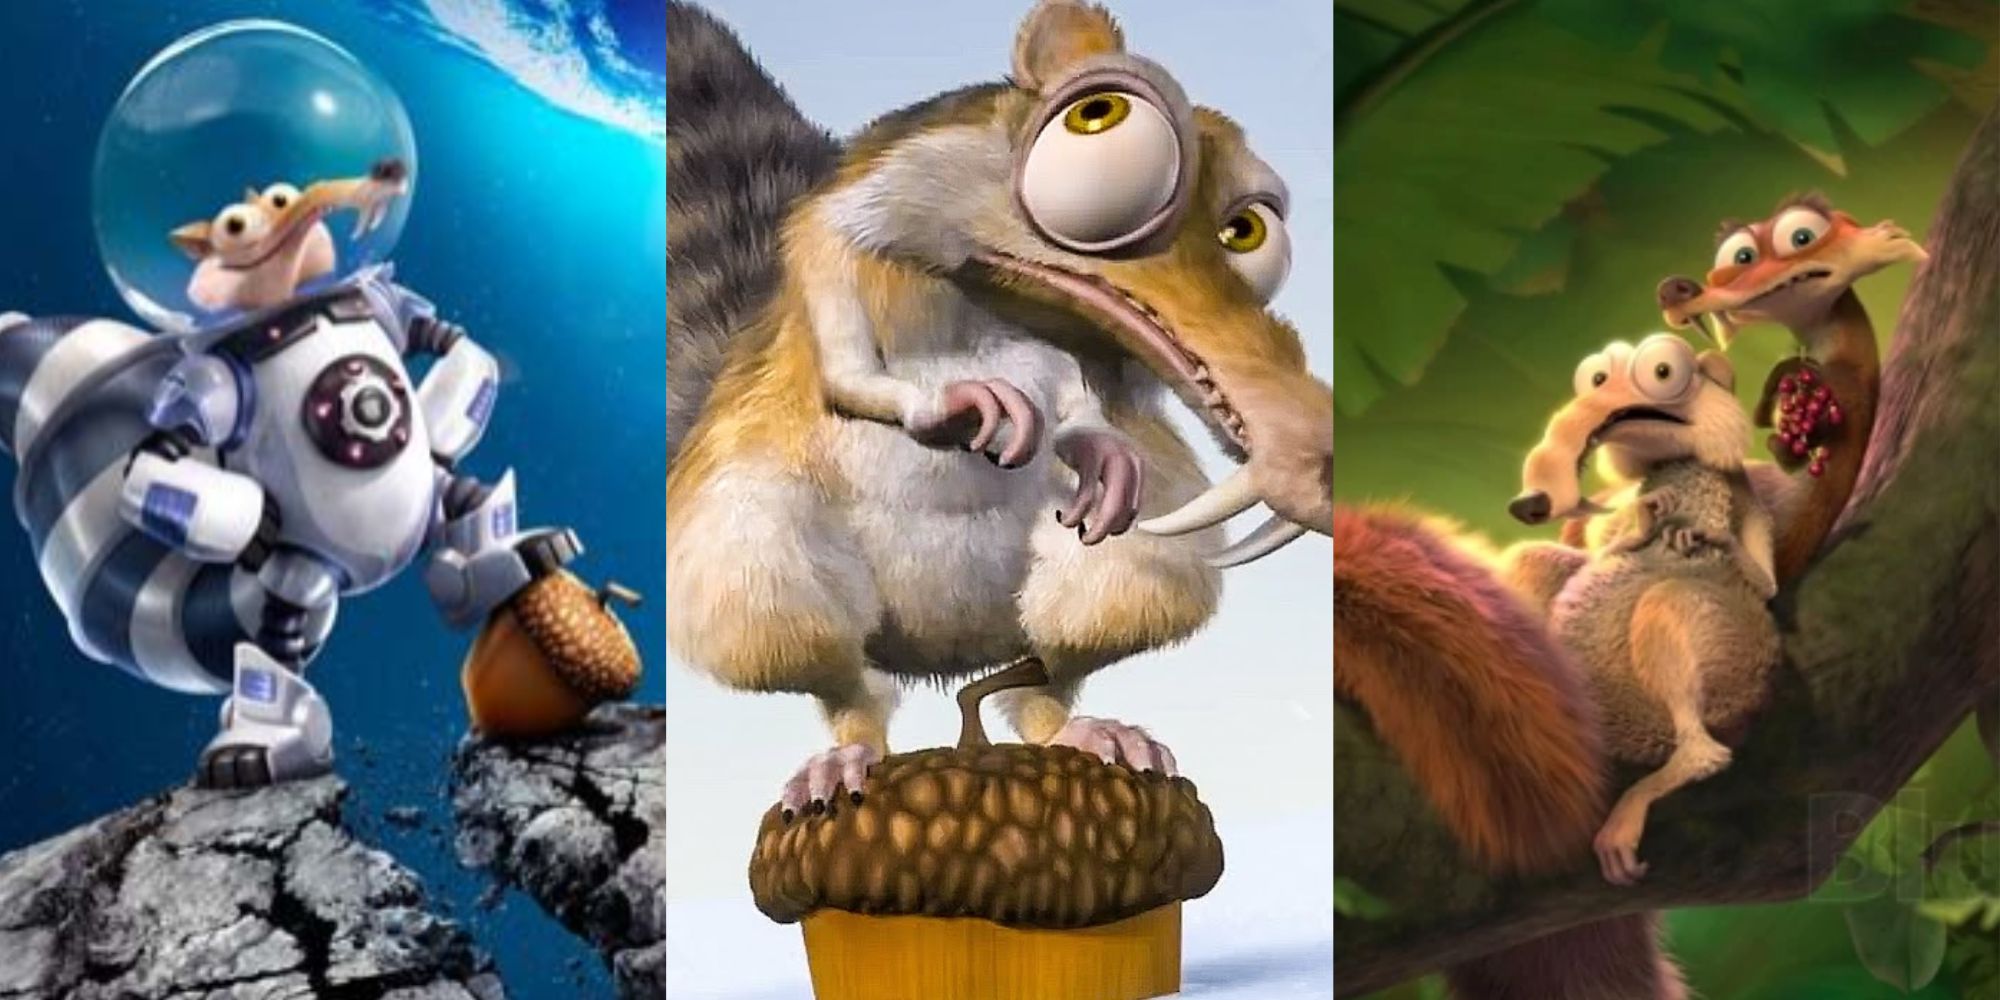 Split image of Scrat standing in a space suit, Scrat standing scared on his acorn, and Scrat and Scratte looking in fear while holding grapes